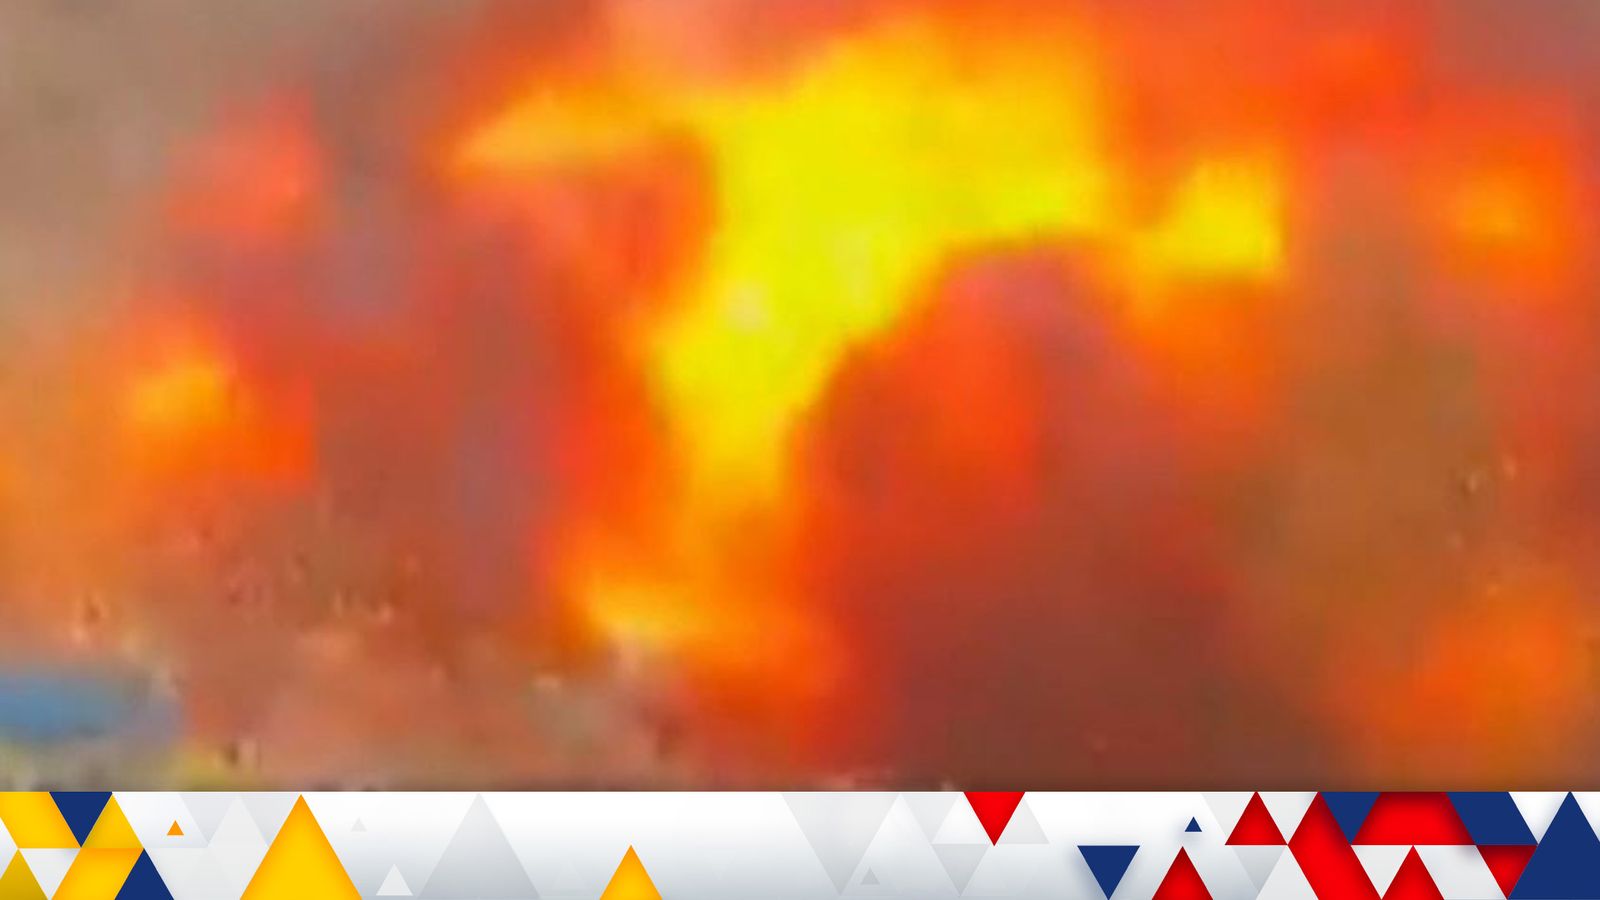 Ukraine invasion: CCTV shows a missile strike on a government building in Kharkiv - causing huge explosion